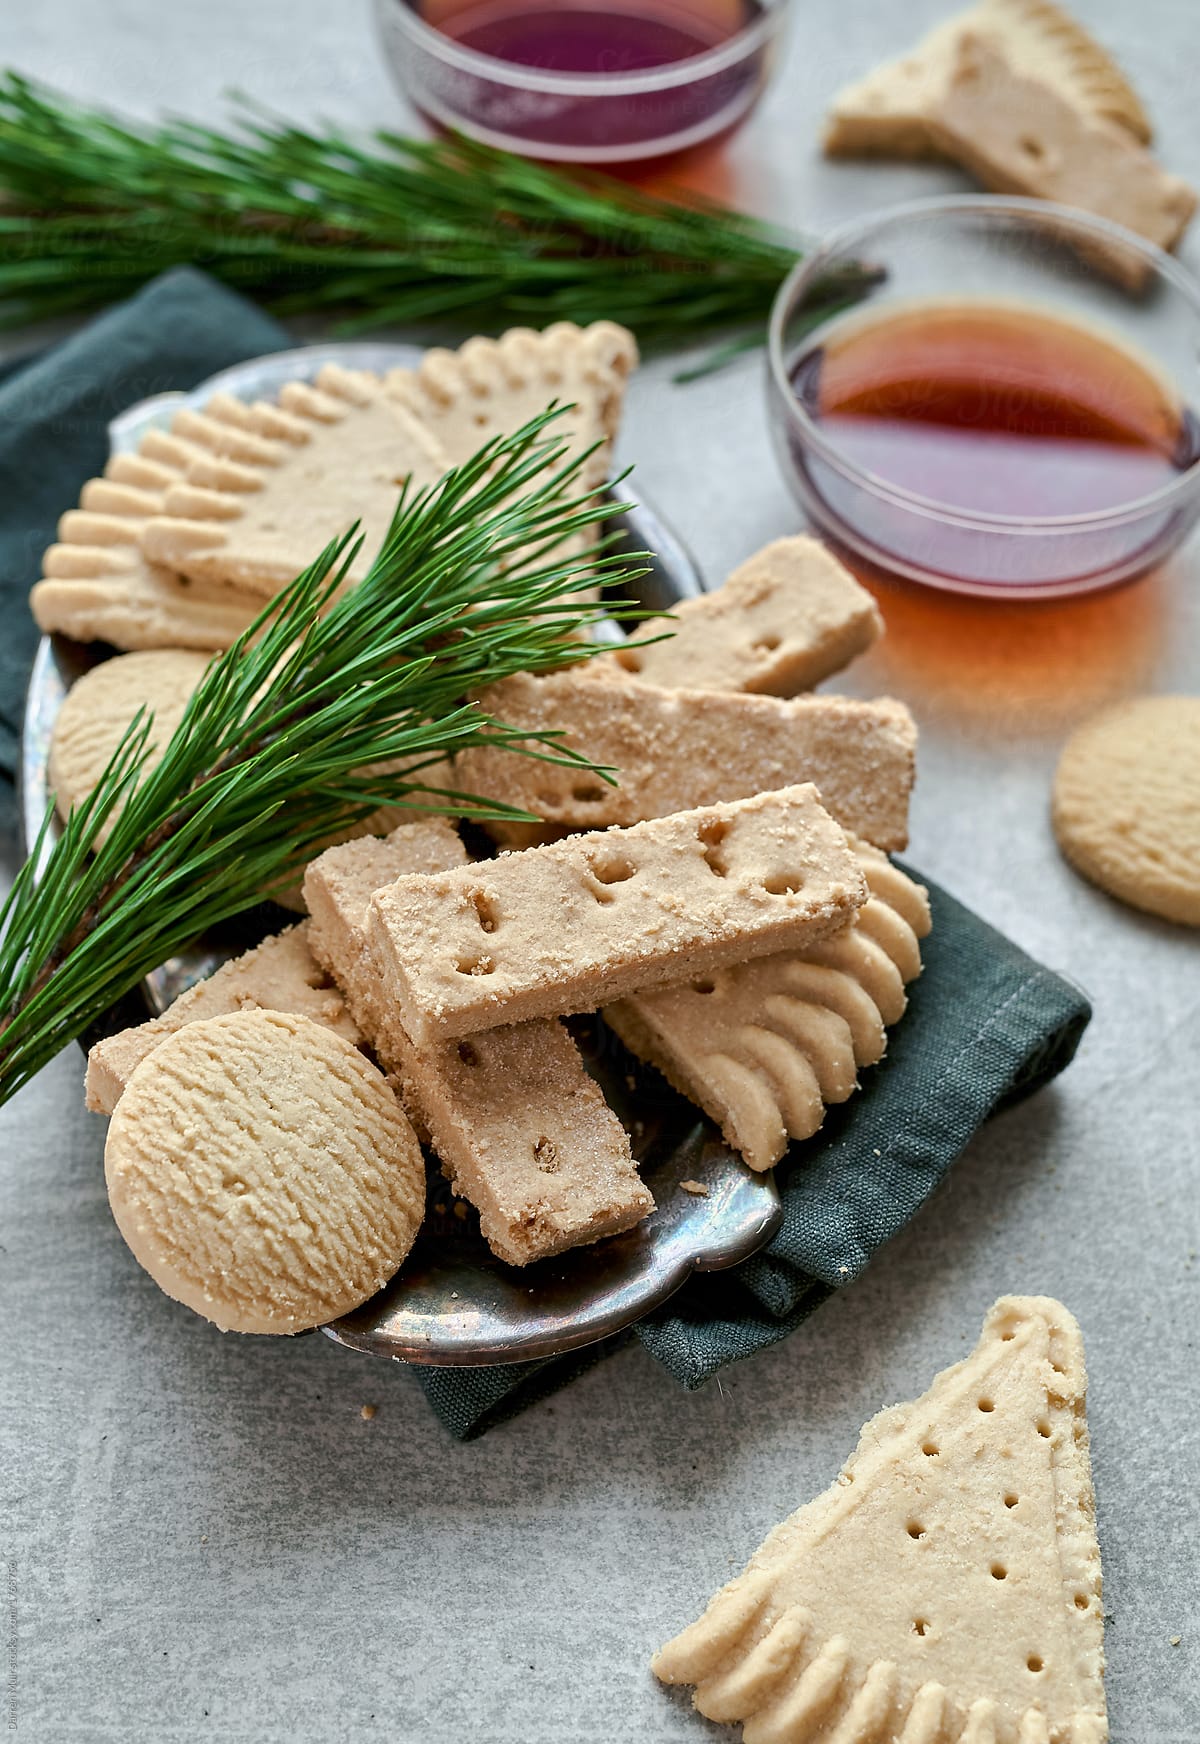 Shortbread Traditional Scottish Shortbread Cookies For Christmas Or The New Year By Darren Muir Scottish Shortbread